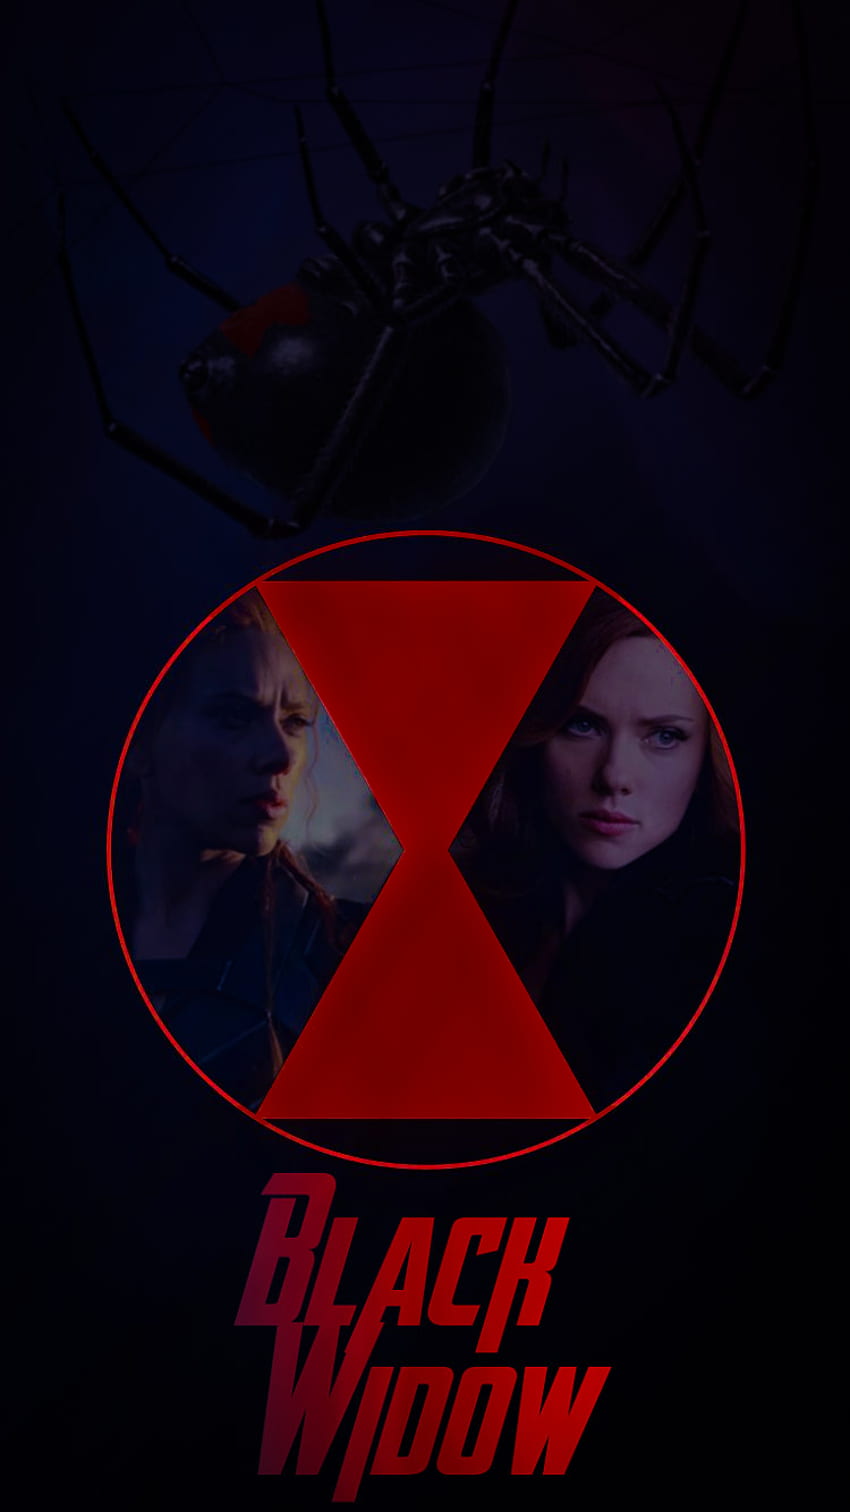 Couldn't sleep, so, here's a Black Widow I made using six different . Thanks for sorting by new. [Fanart] : Marvel HD phone wallpaper